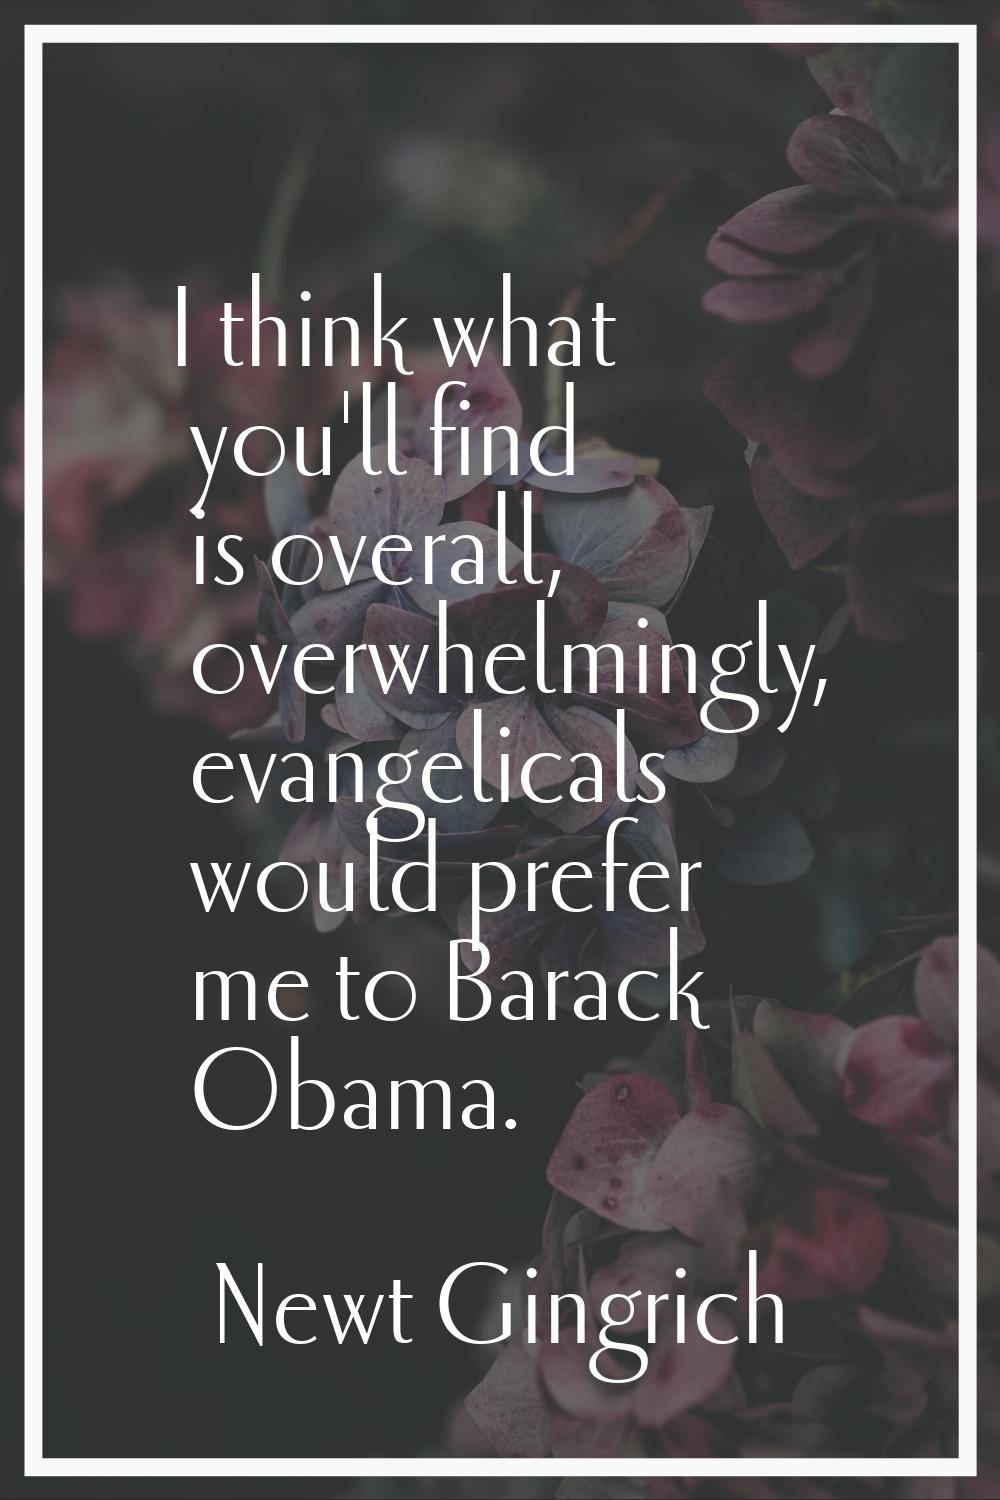 I think what you'll find is overall, overwhelmingly, evangelicals would prefer me to Barack Obama.